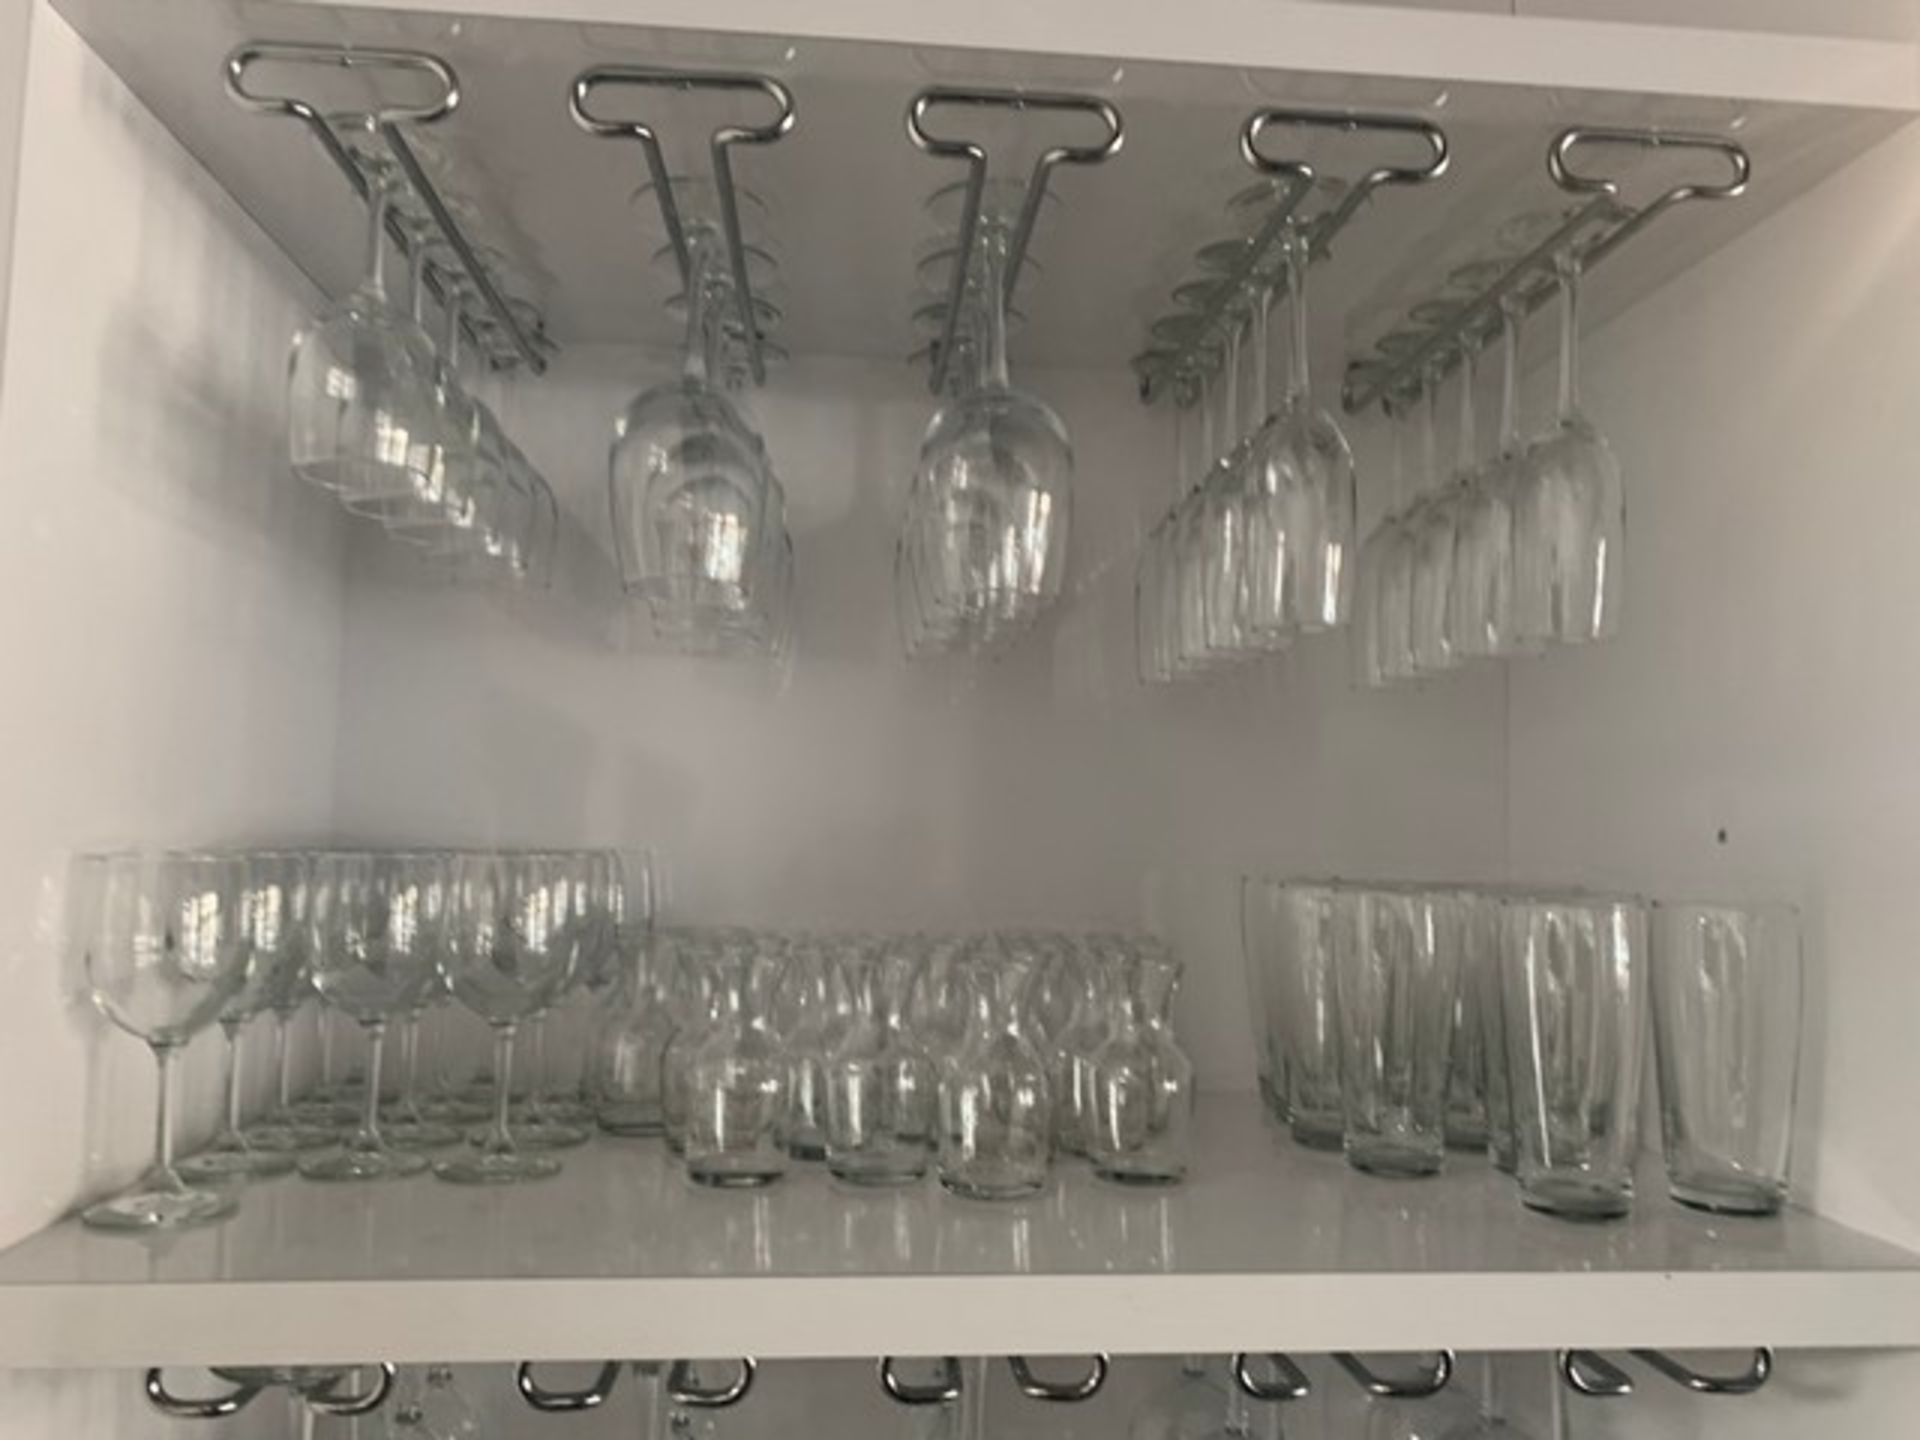 PIECES CLEAR GLASSWARE, STEMWARE, CARAFES, WHITE & RED WINE GLASSES, MORE - Image 2 of 2